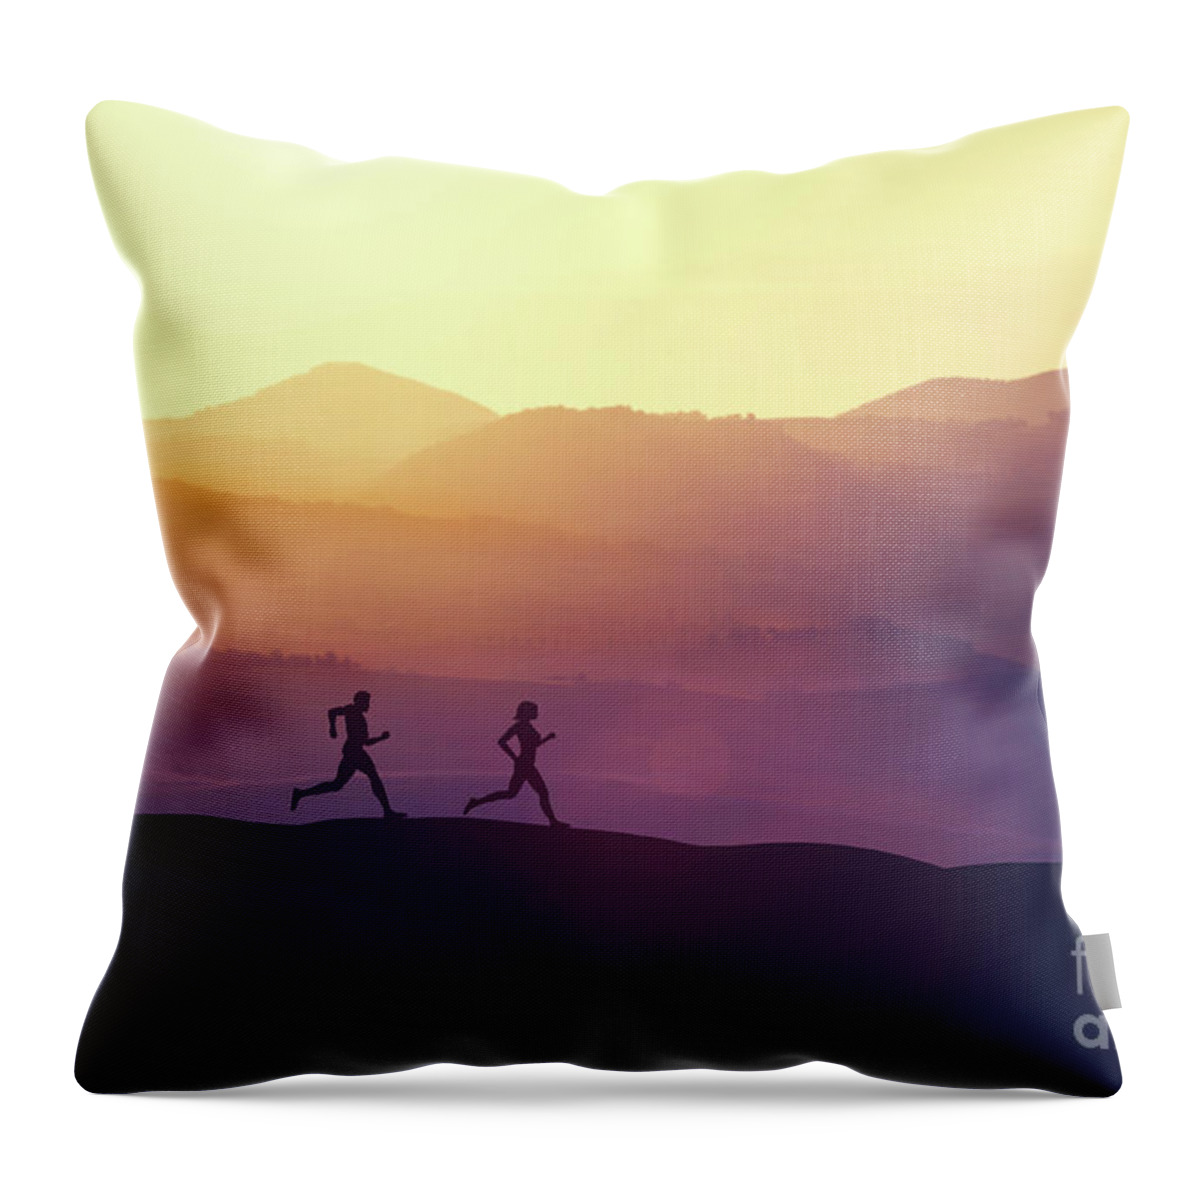 Man Throw Pillow featuring the photograph Man and woman running on a hill in the country by Michal Bednarek